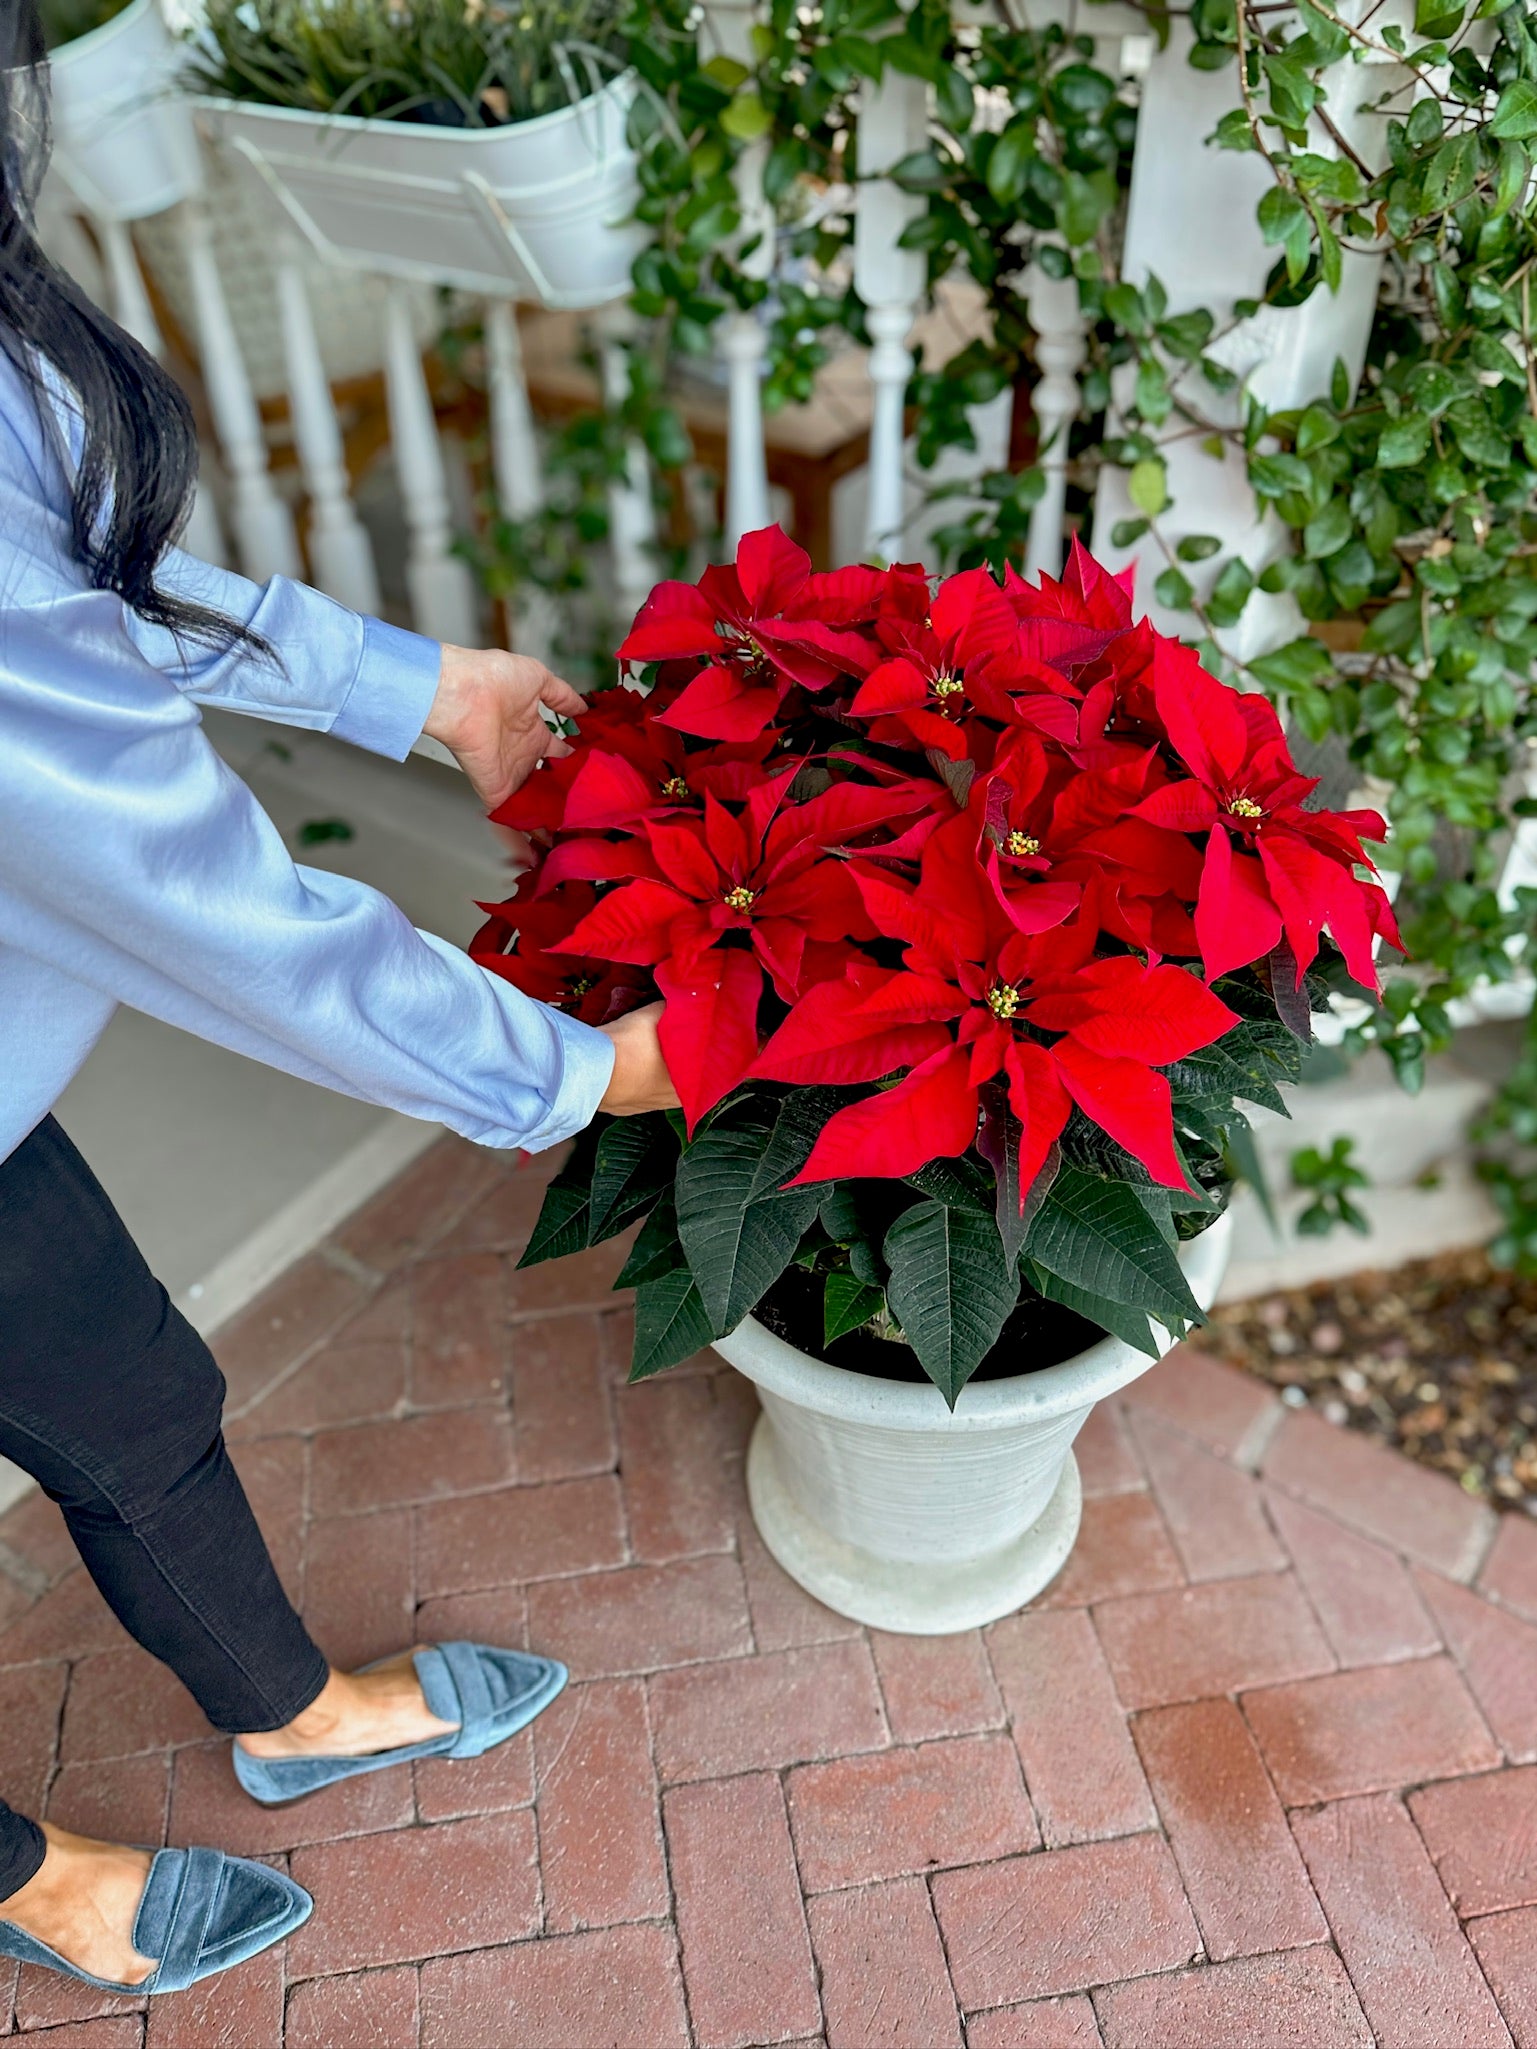 Placing a Poinsettia on the Porch to add to the decor and add color